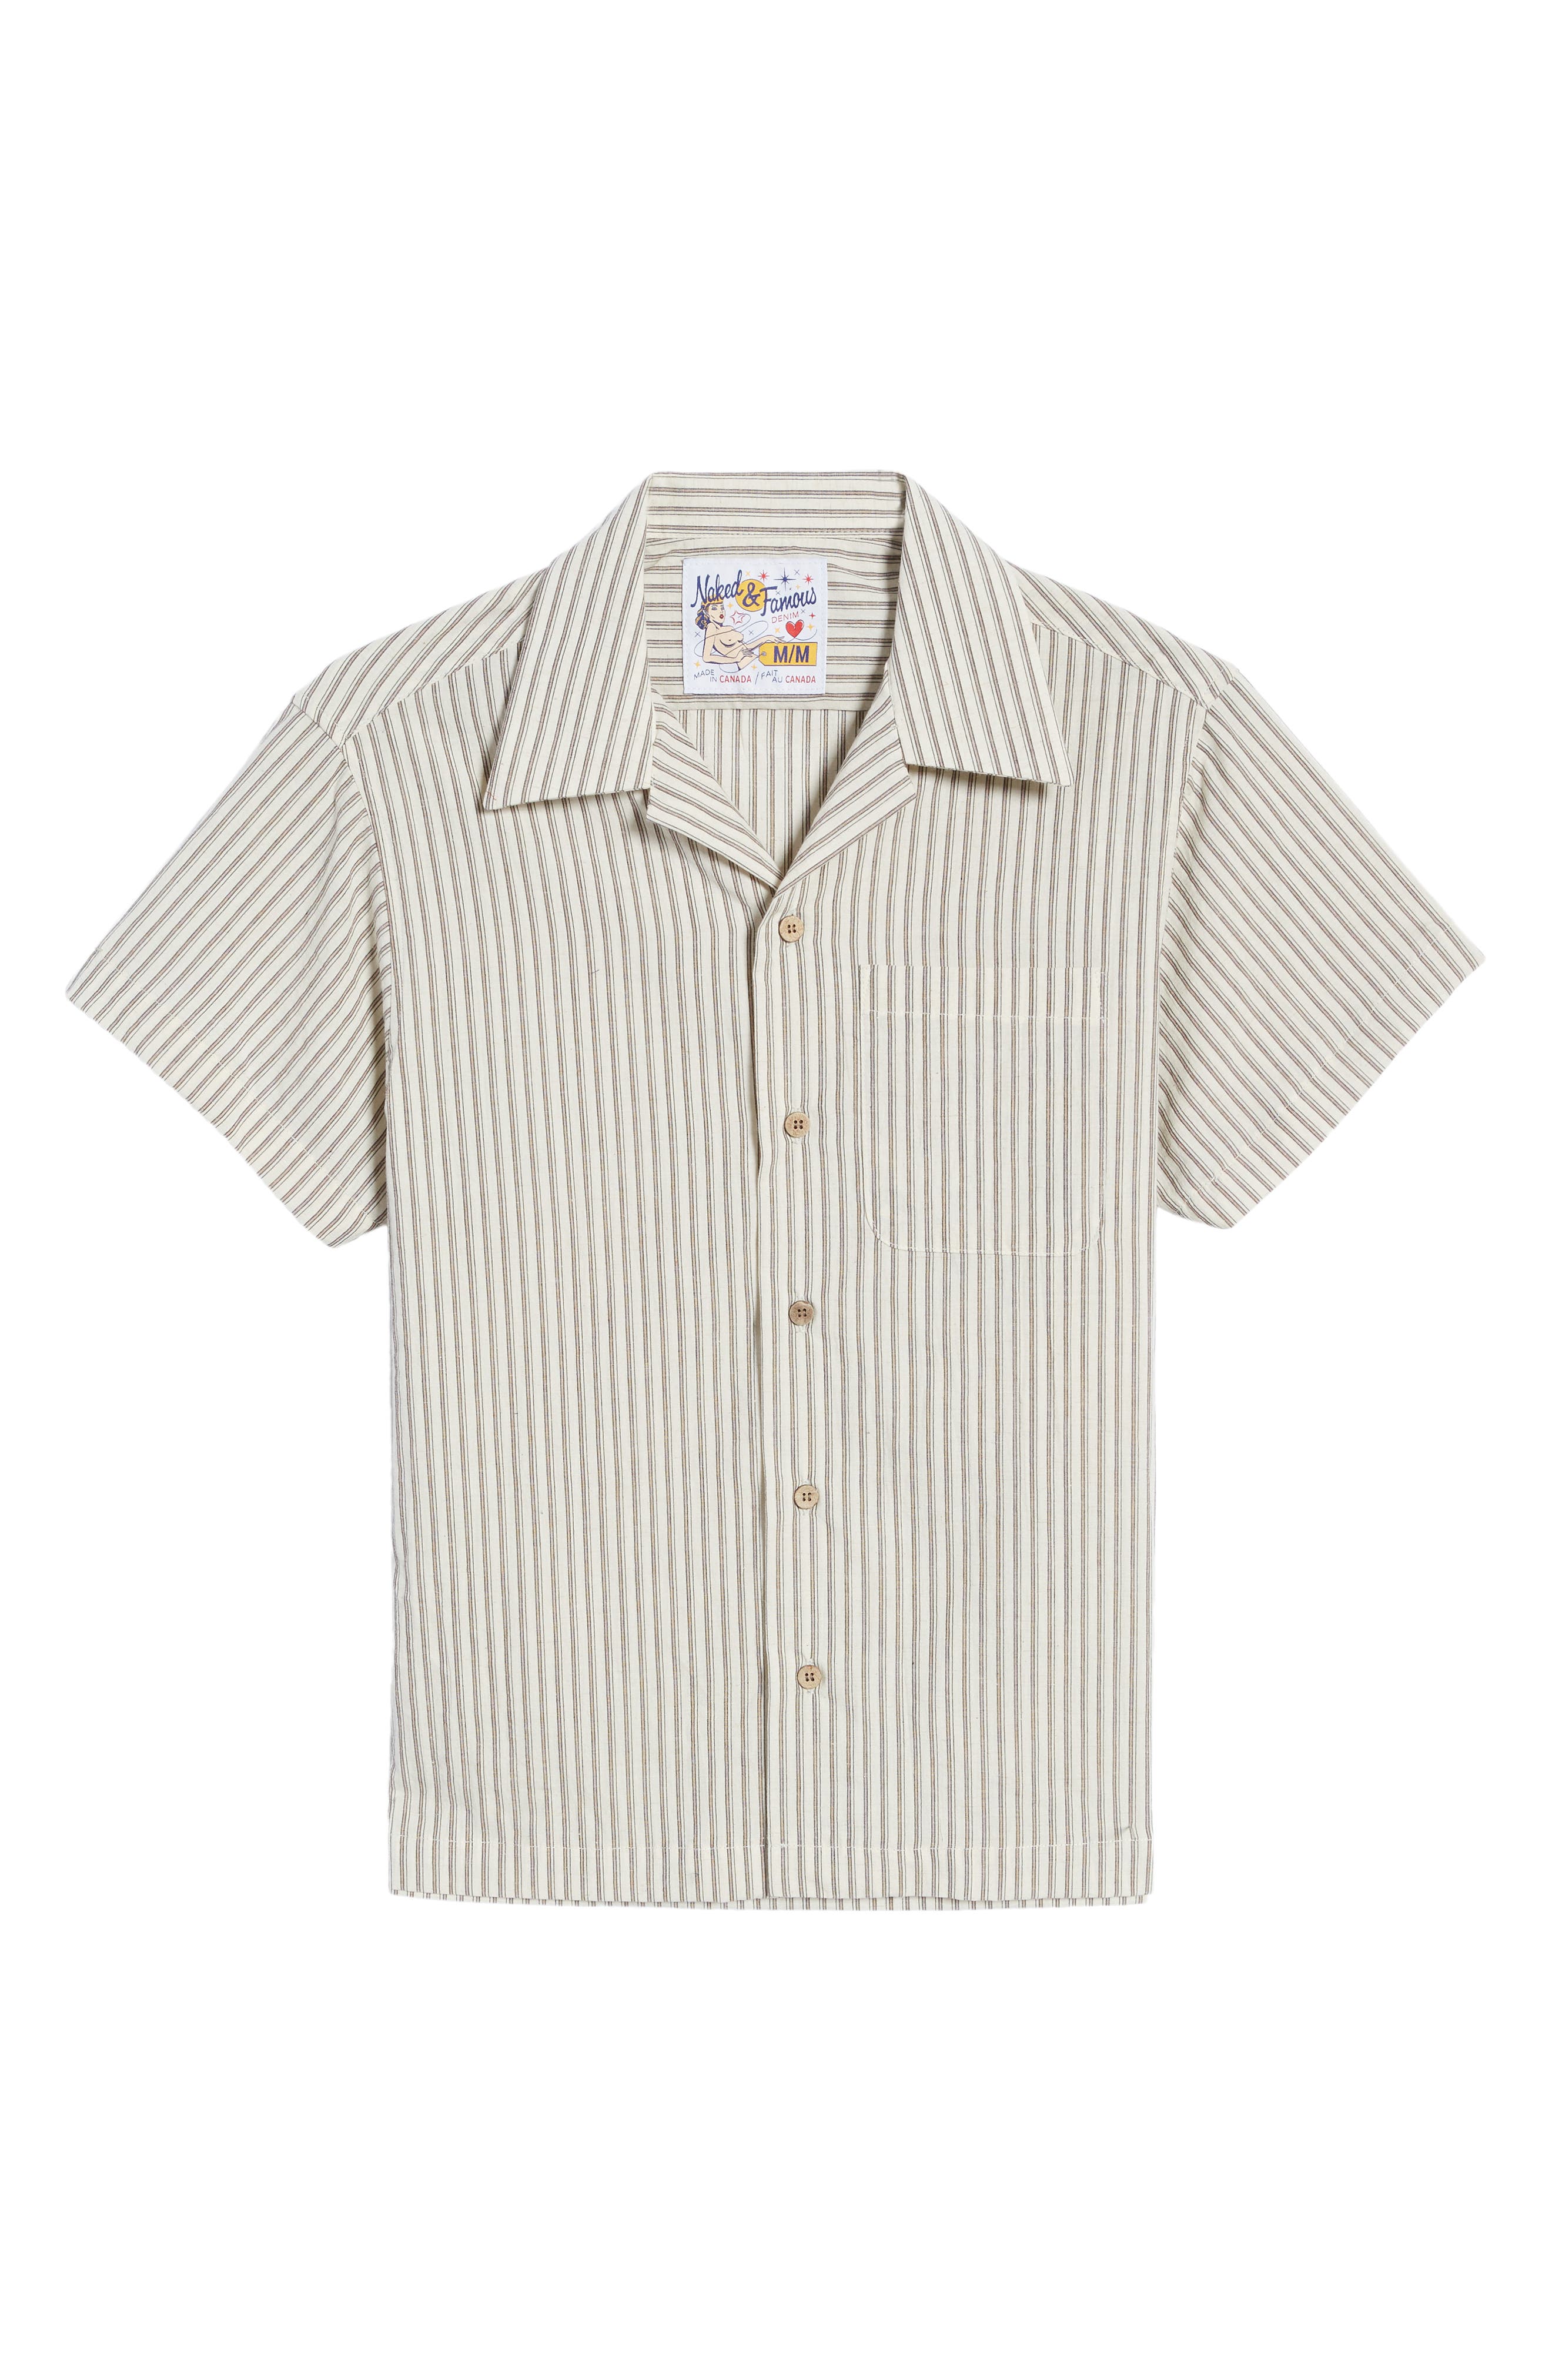 Naked & Famous Denim Men's Broad Stripe Short Sleeve Cotton & Linen Button-up Shirt In Cream At Nord